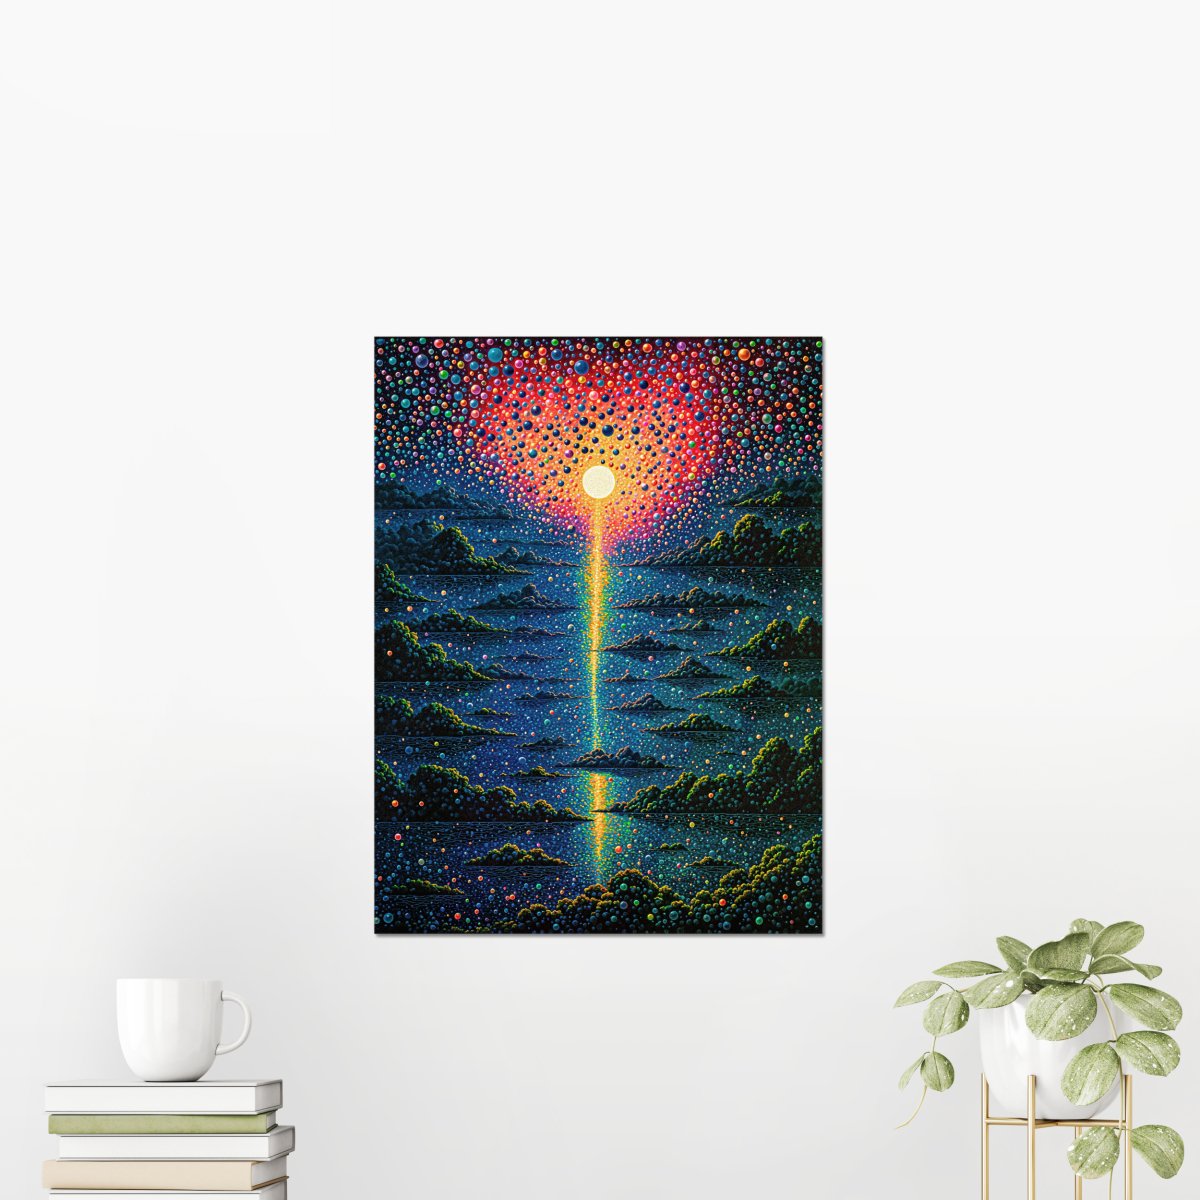 Bubbly sunset - Art print - Poster - Ever colorful